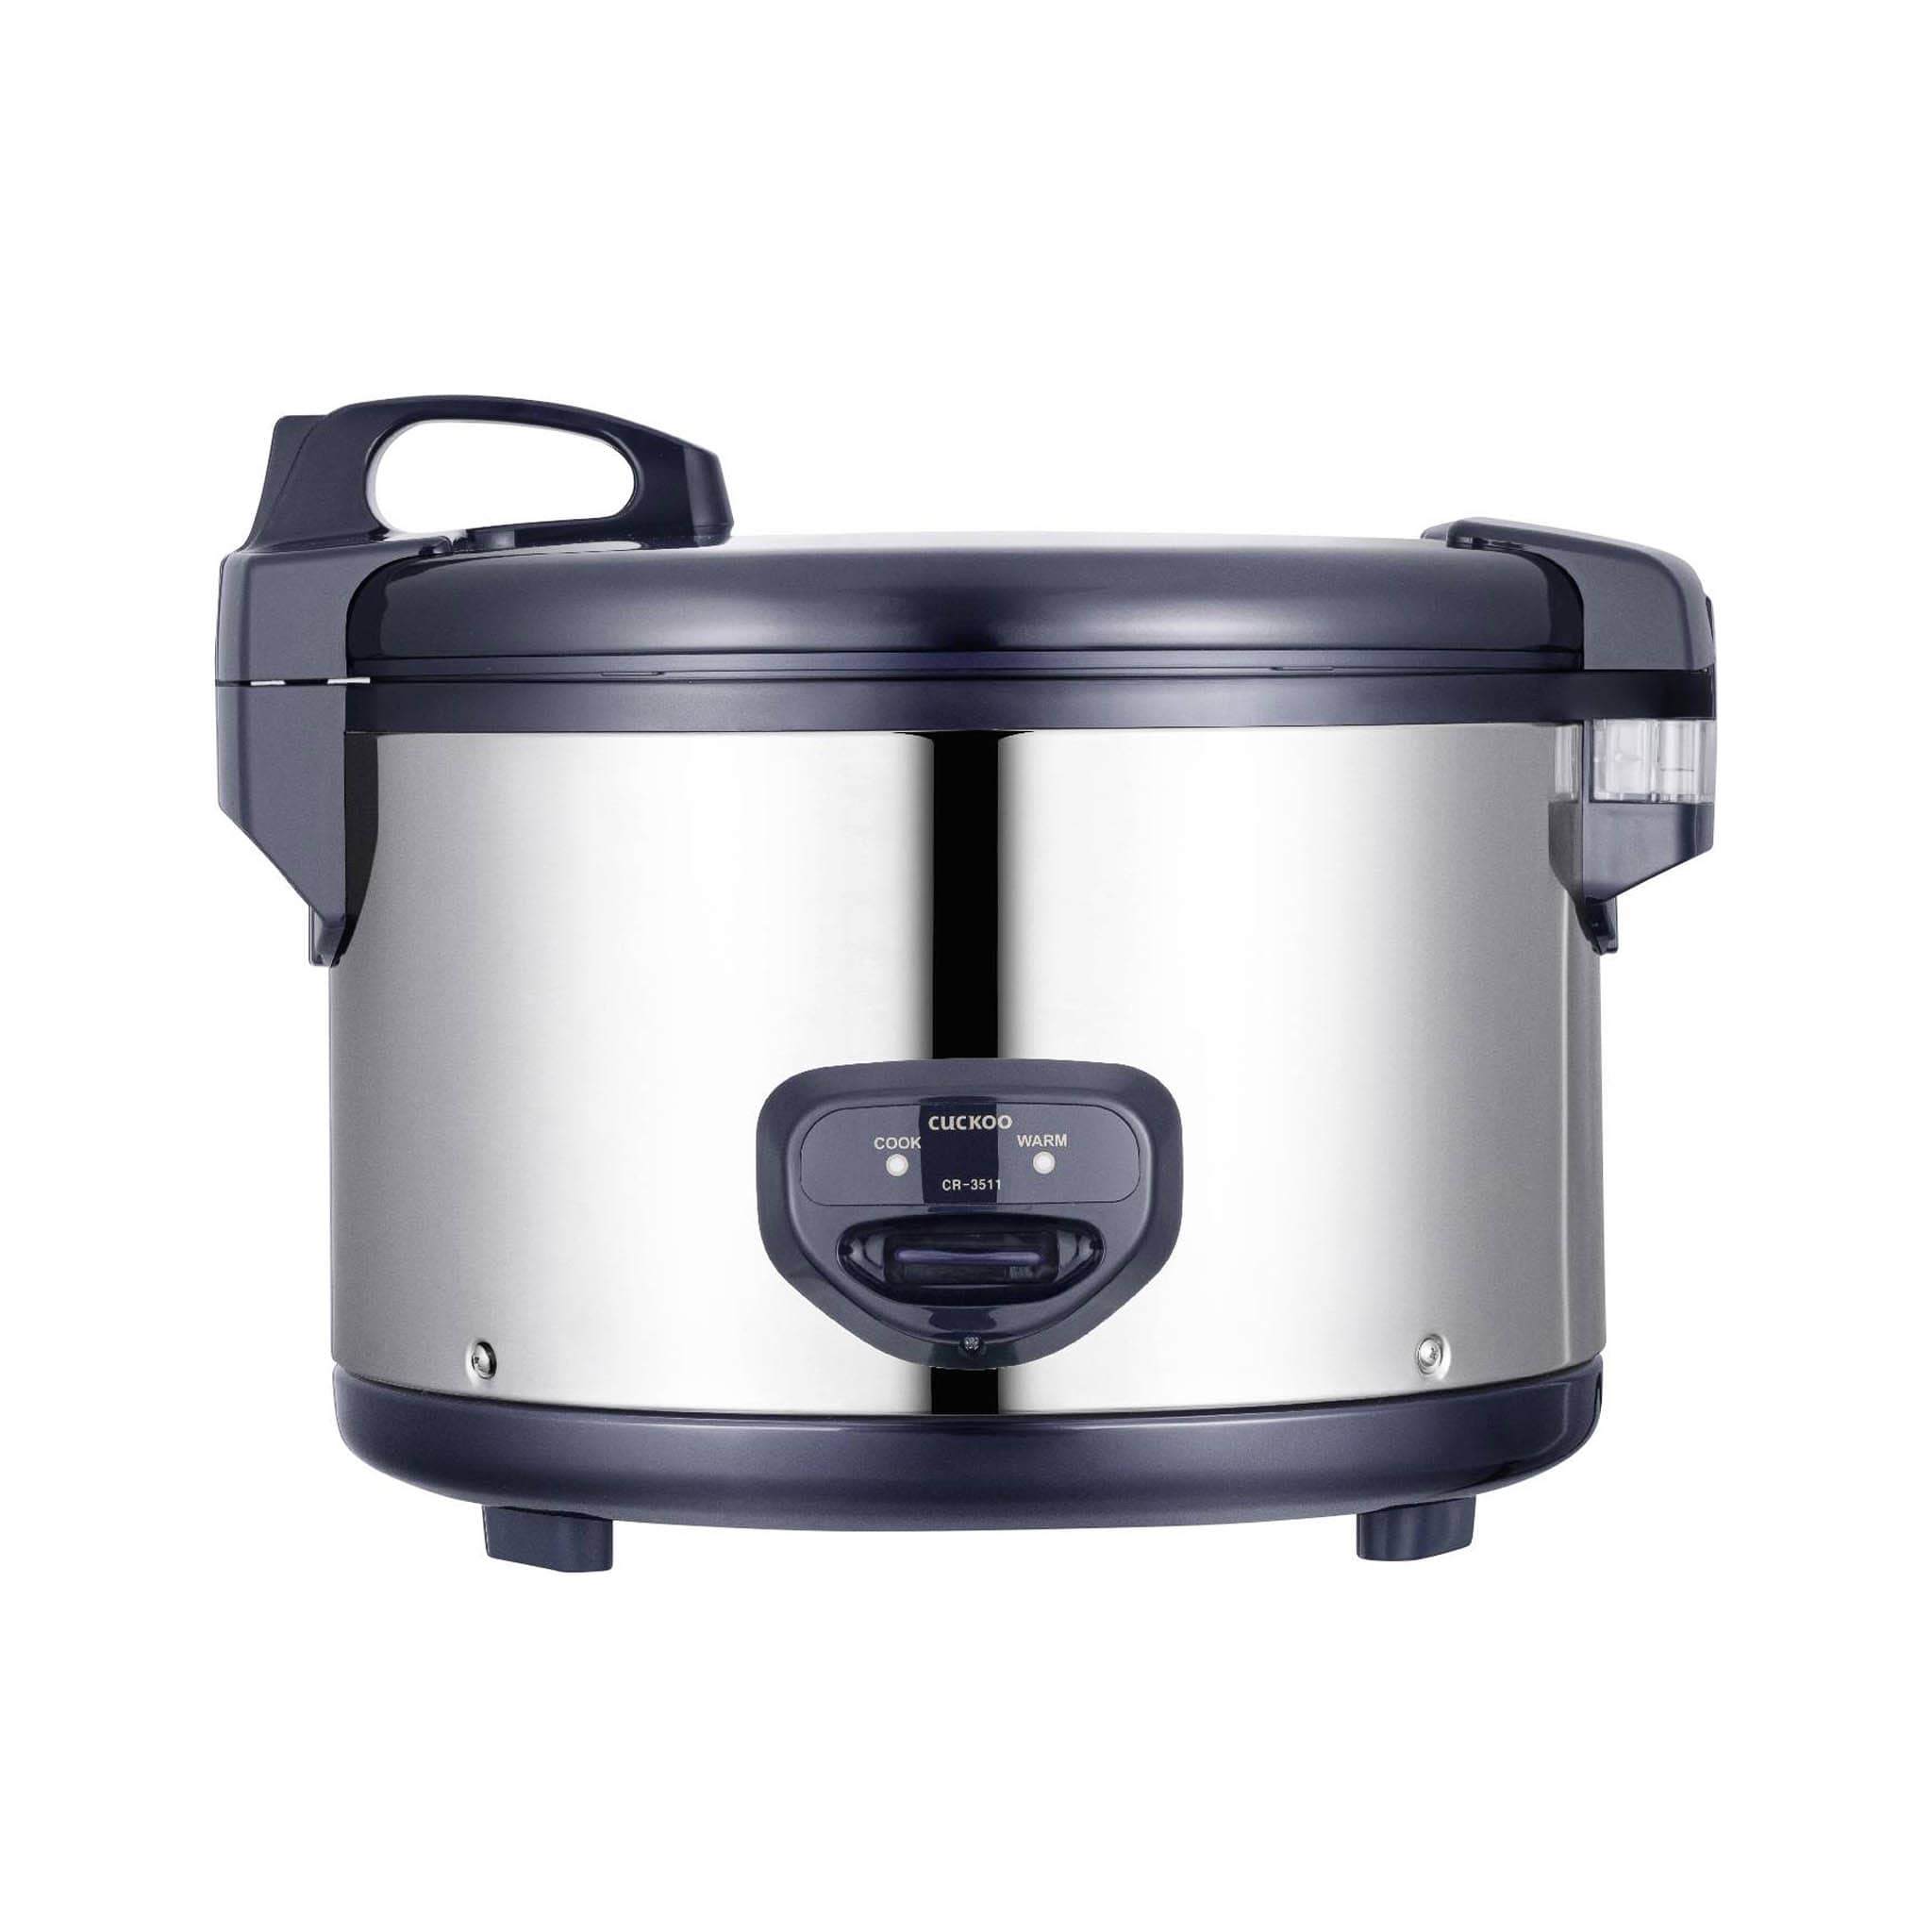 Cuckoo Electric Rice Cooker 6.3L - 35 Persons